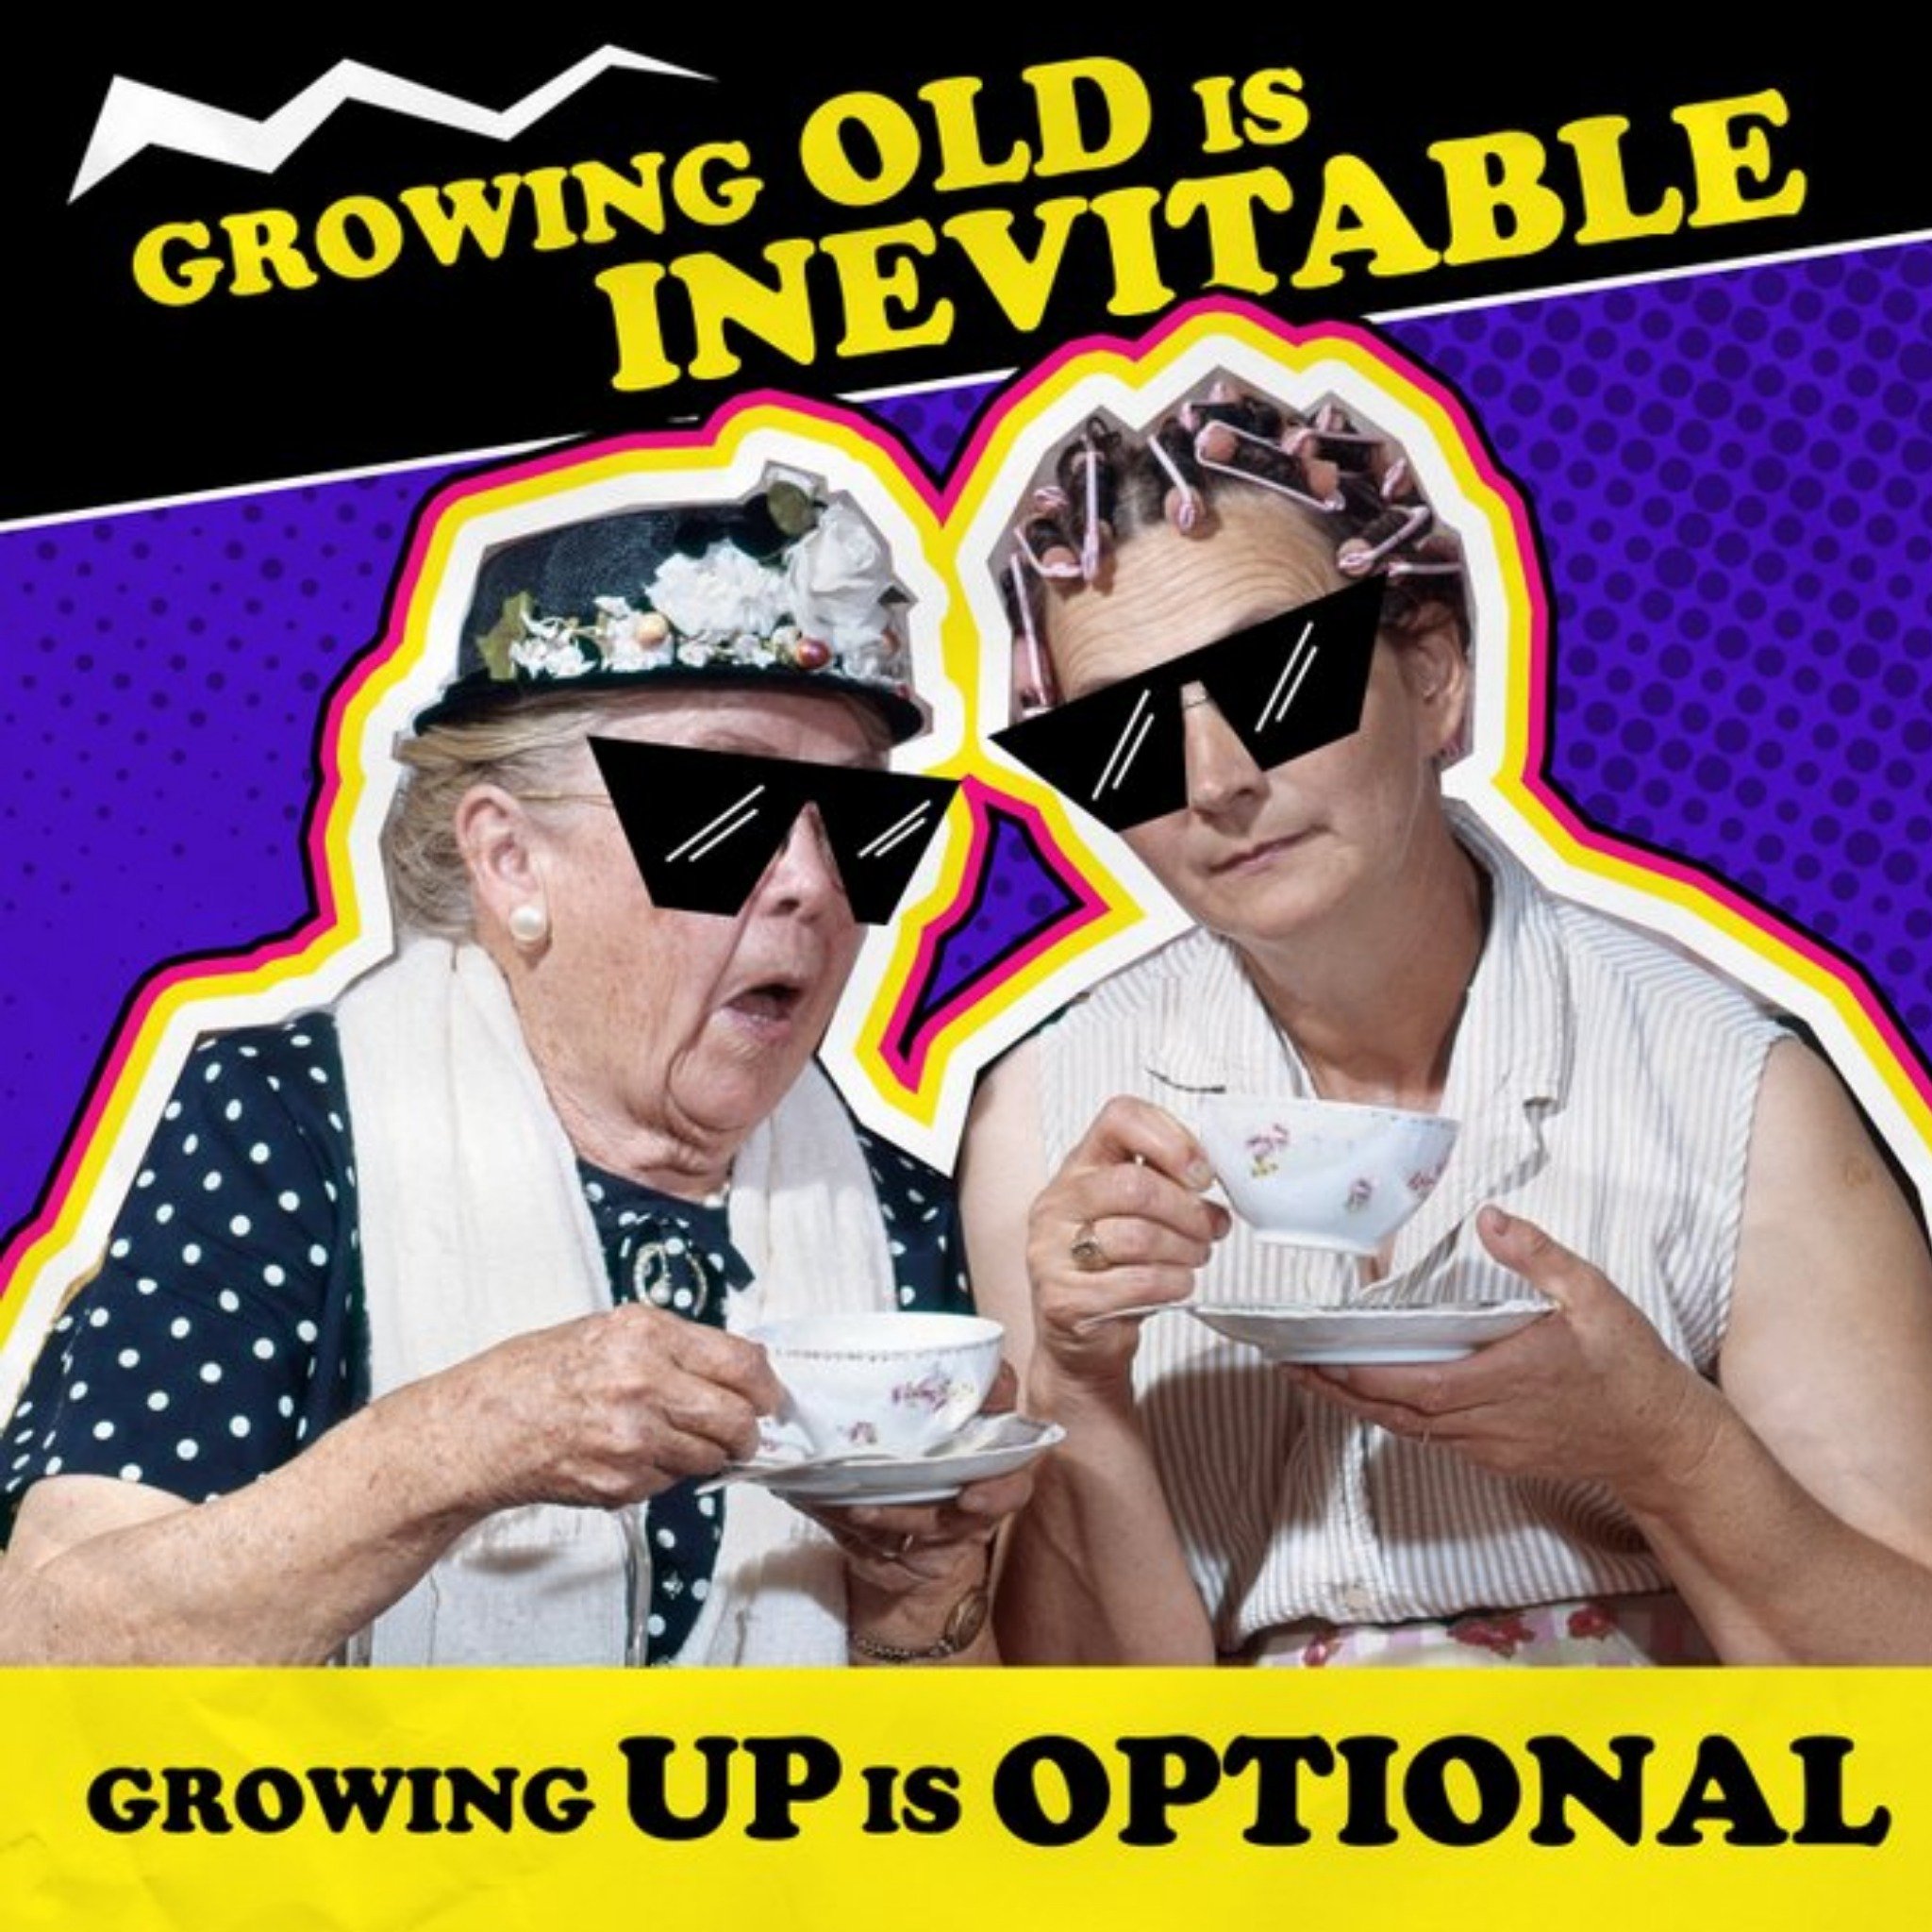 Moonpig Funny Old Age Humour Joke Record Cover Birthday Card Growing Old Is Ineveitable Growing Up I